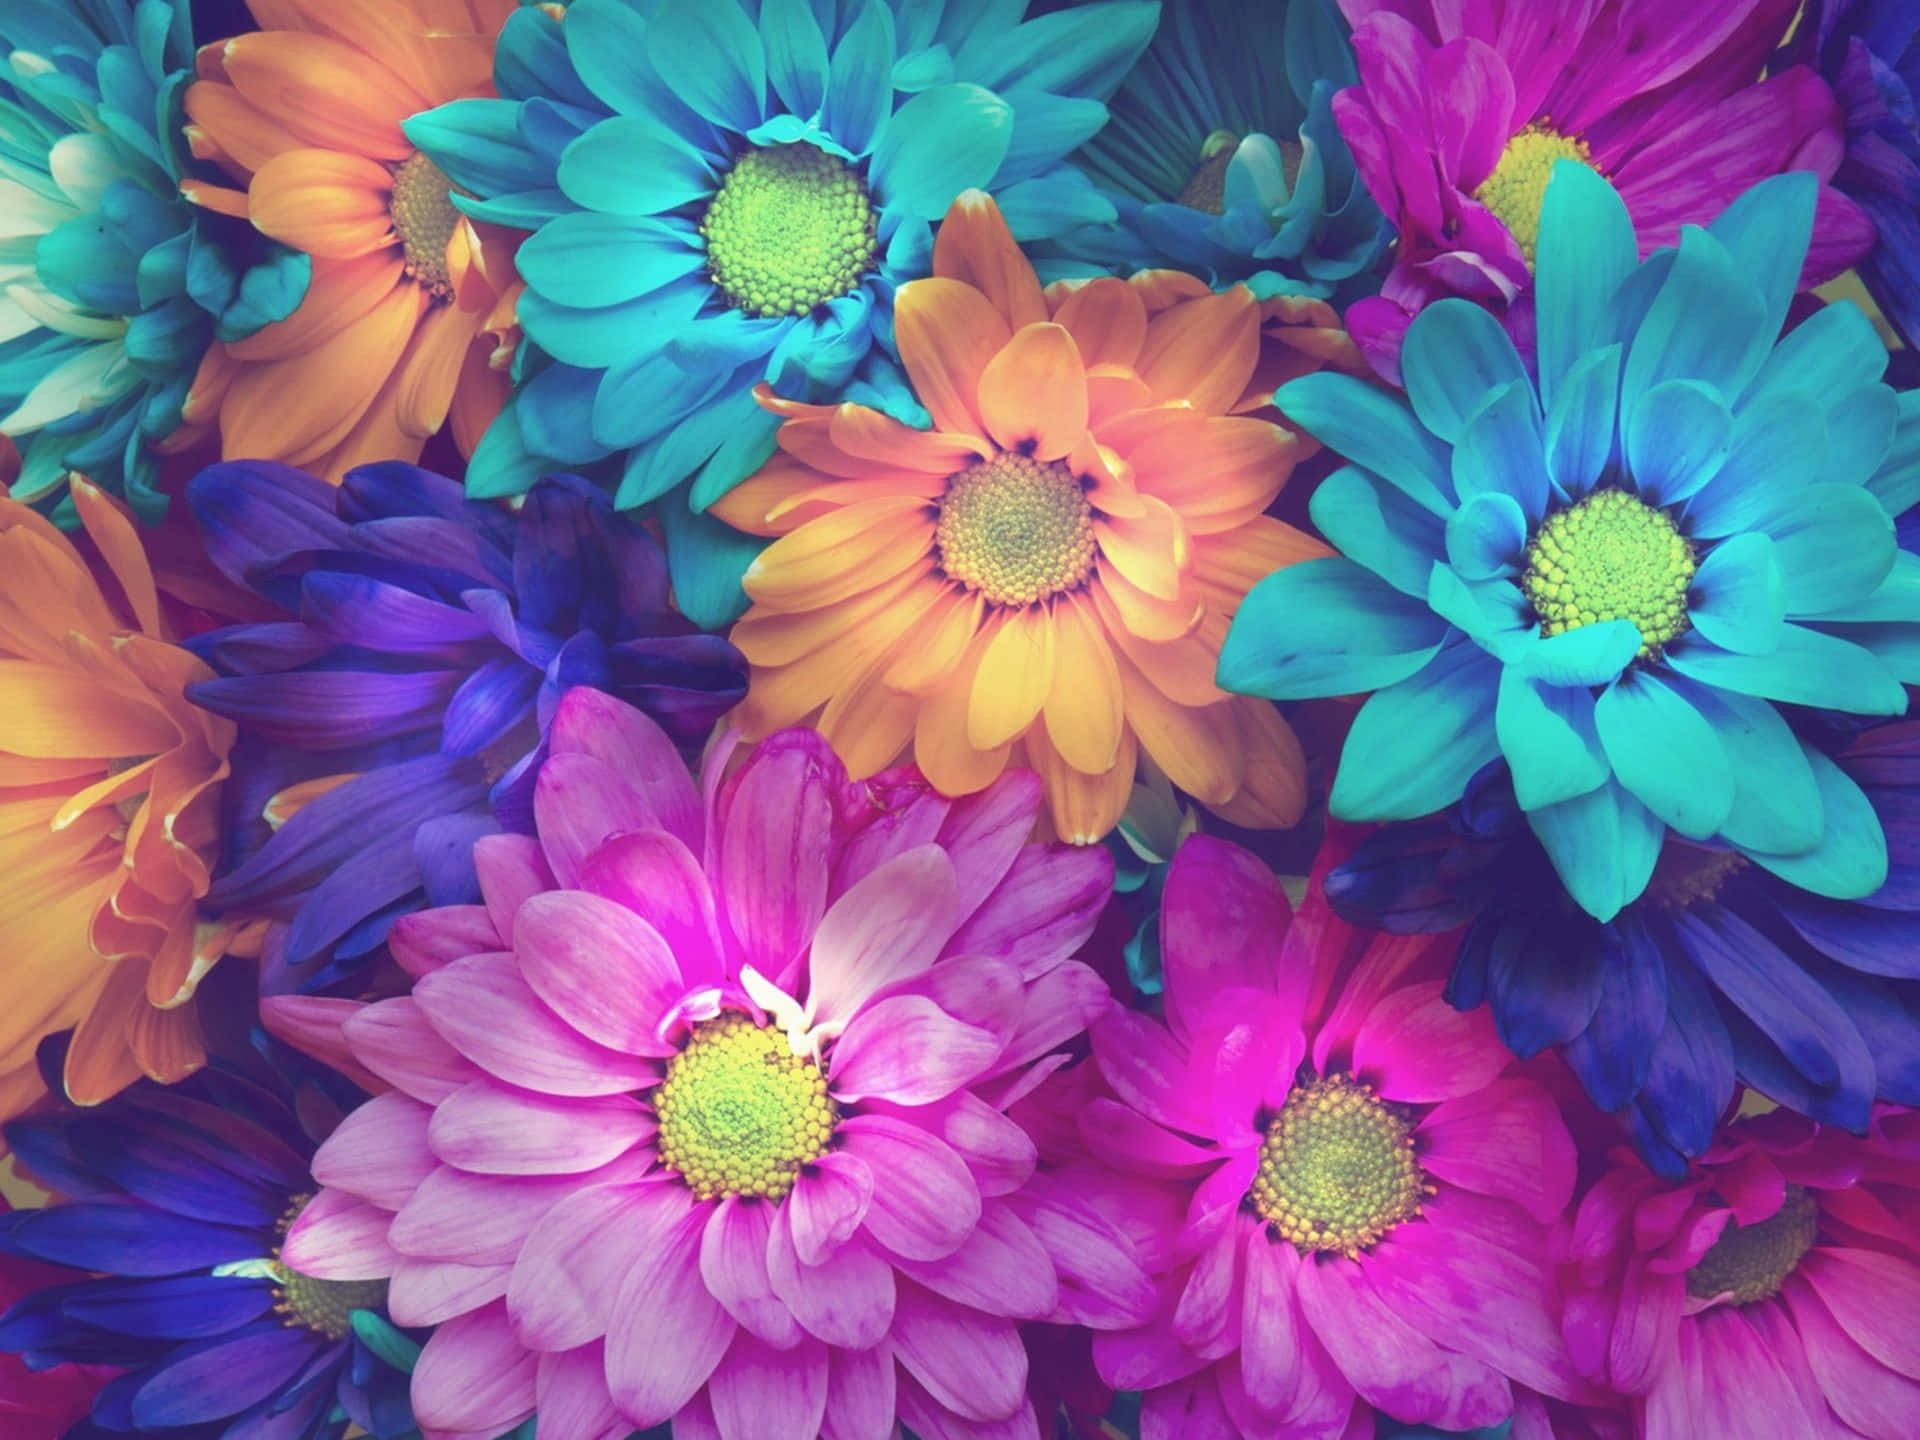 "Colorful daisies in a field of green." Wallpaper